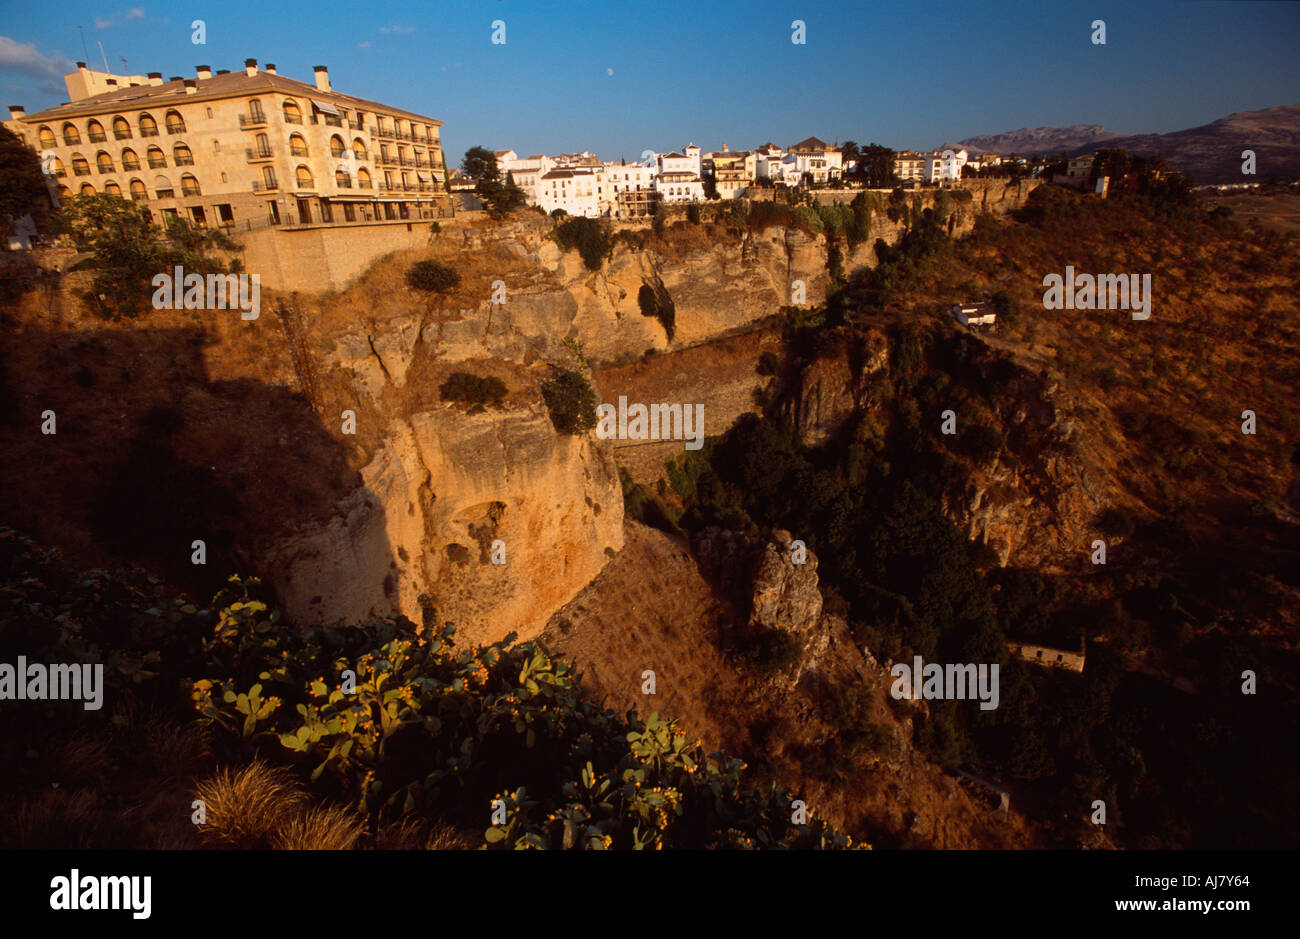 Looking out from the top of the cliffs showing the Parador, Ronda, Andalucia, Spain Stock Photo